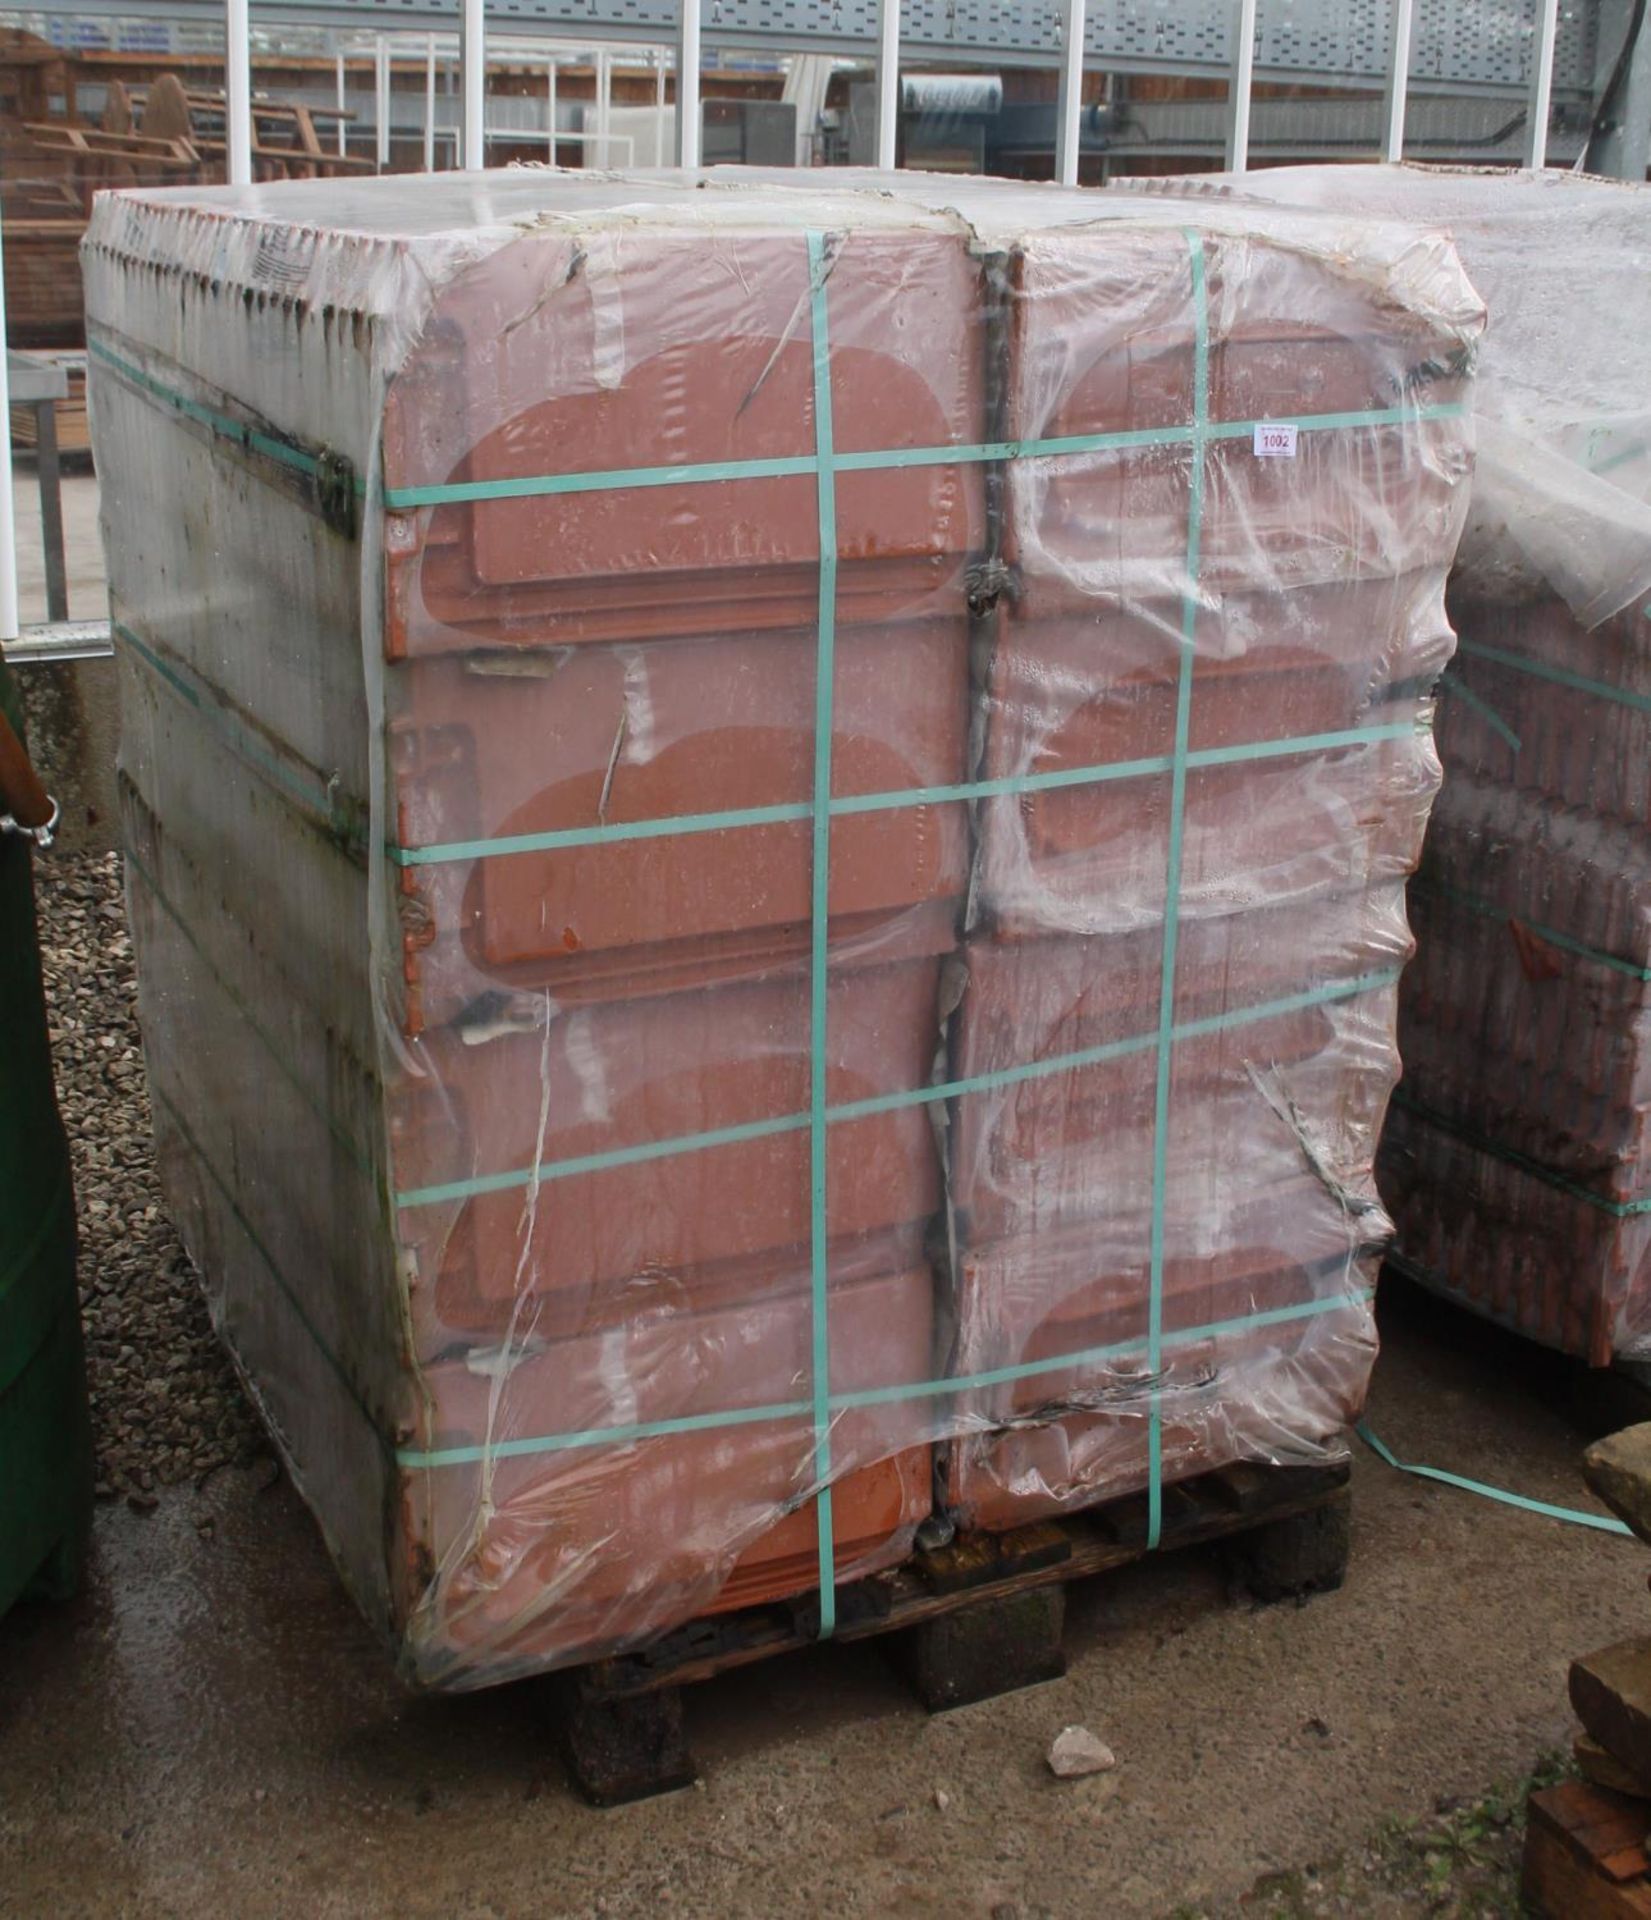 PALLET OF CREST CLAY ROOFING TILES G10 NATURAL RED CLAY APPROX. 230 TILES (10 PER SQUARE METRE.)